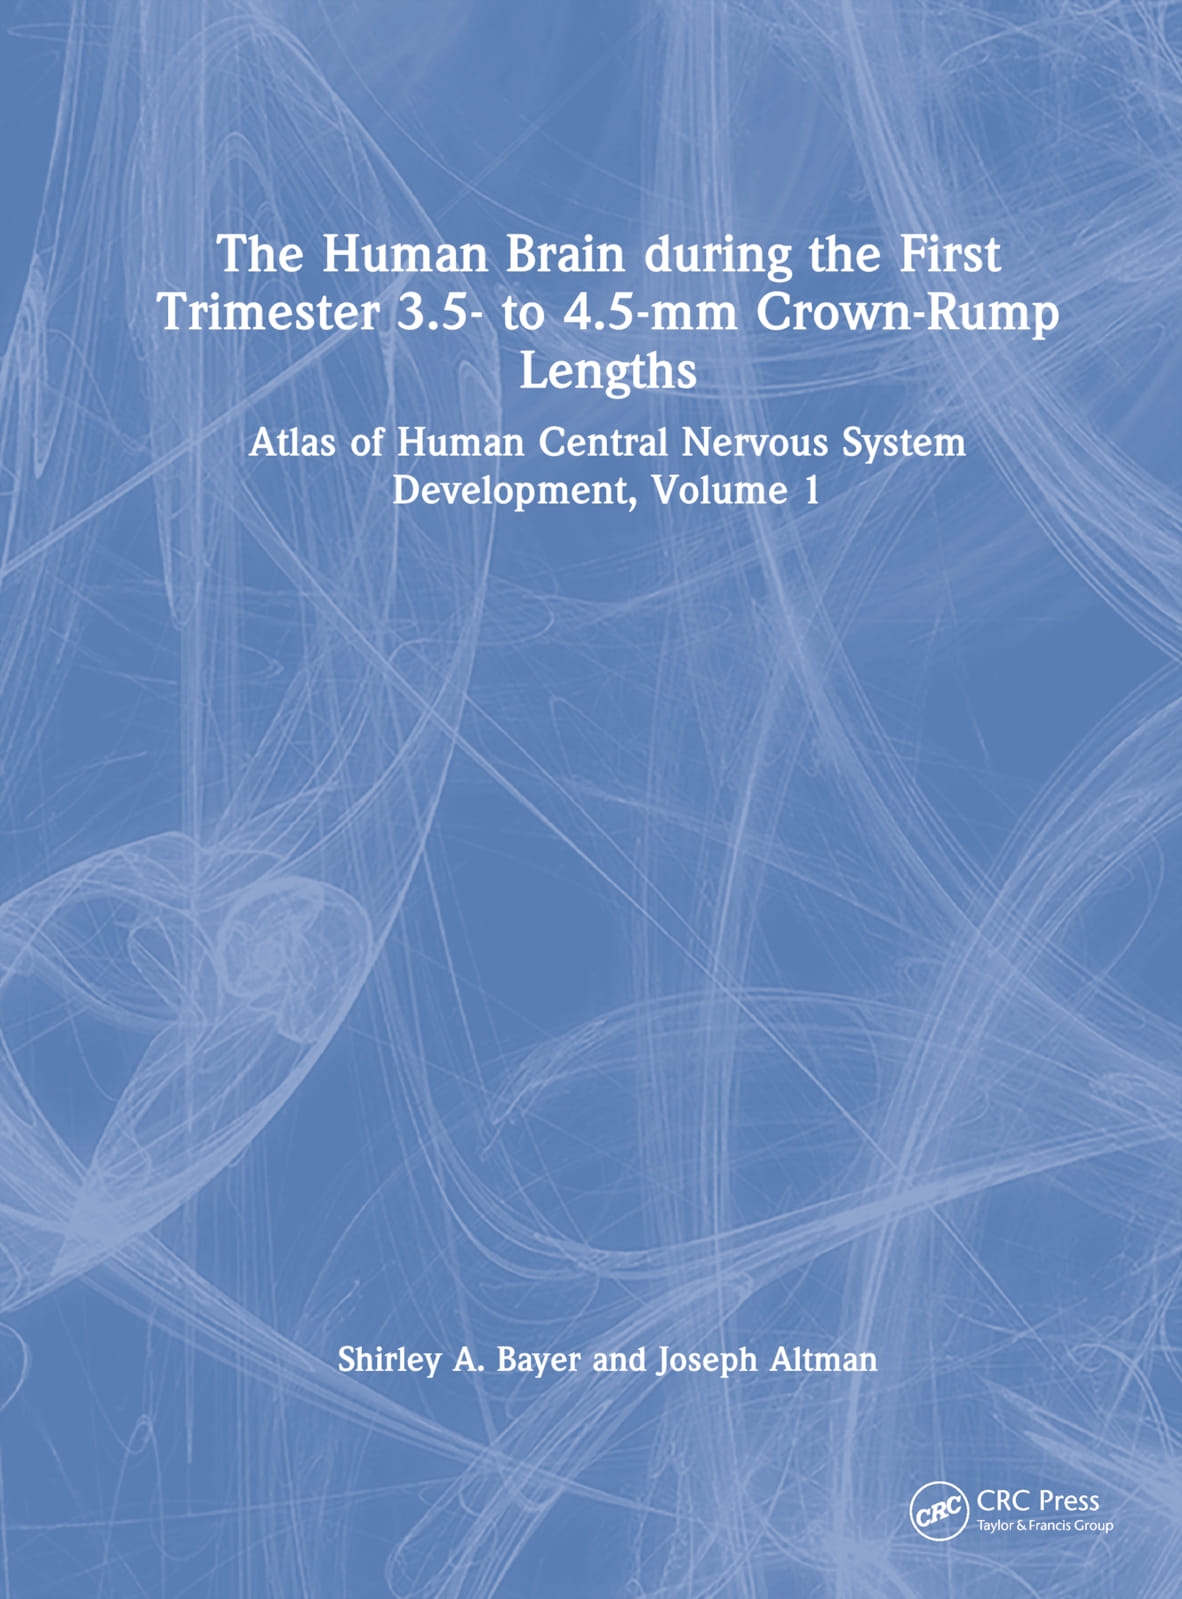 The Human Brain During the Early First Trimester 3.5 to 4.5 MM Crown-Rump (Cr) Lengths: Atlas of Human Central Nervous System Development, Volume 1